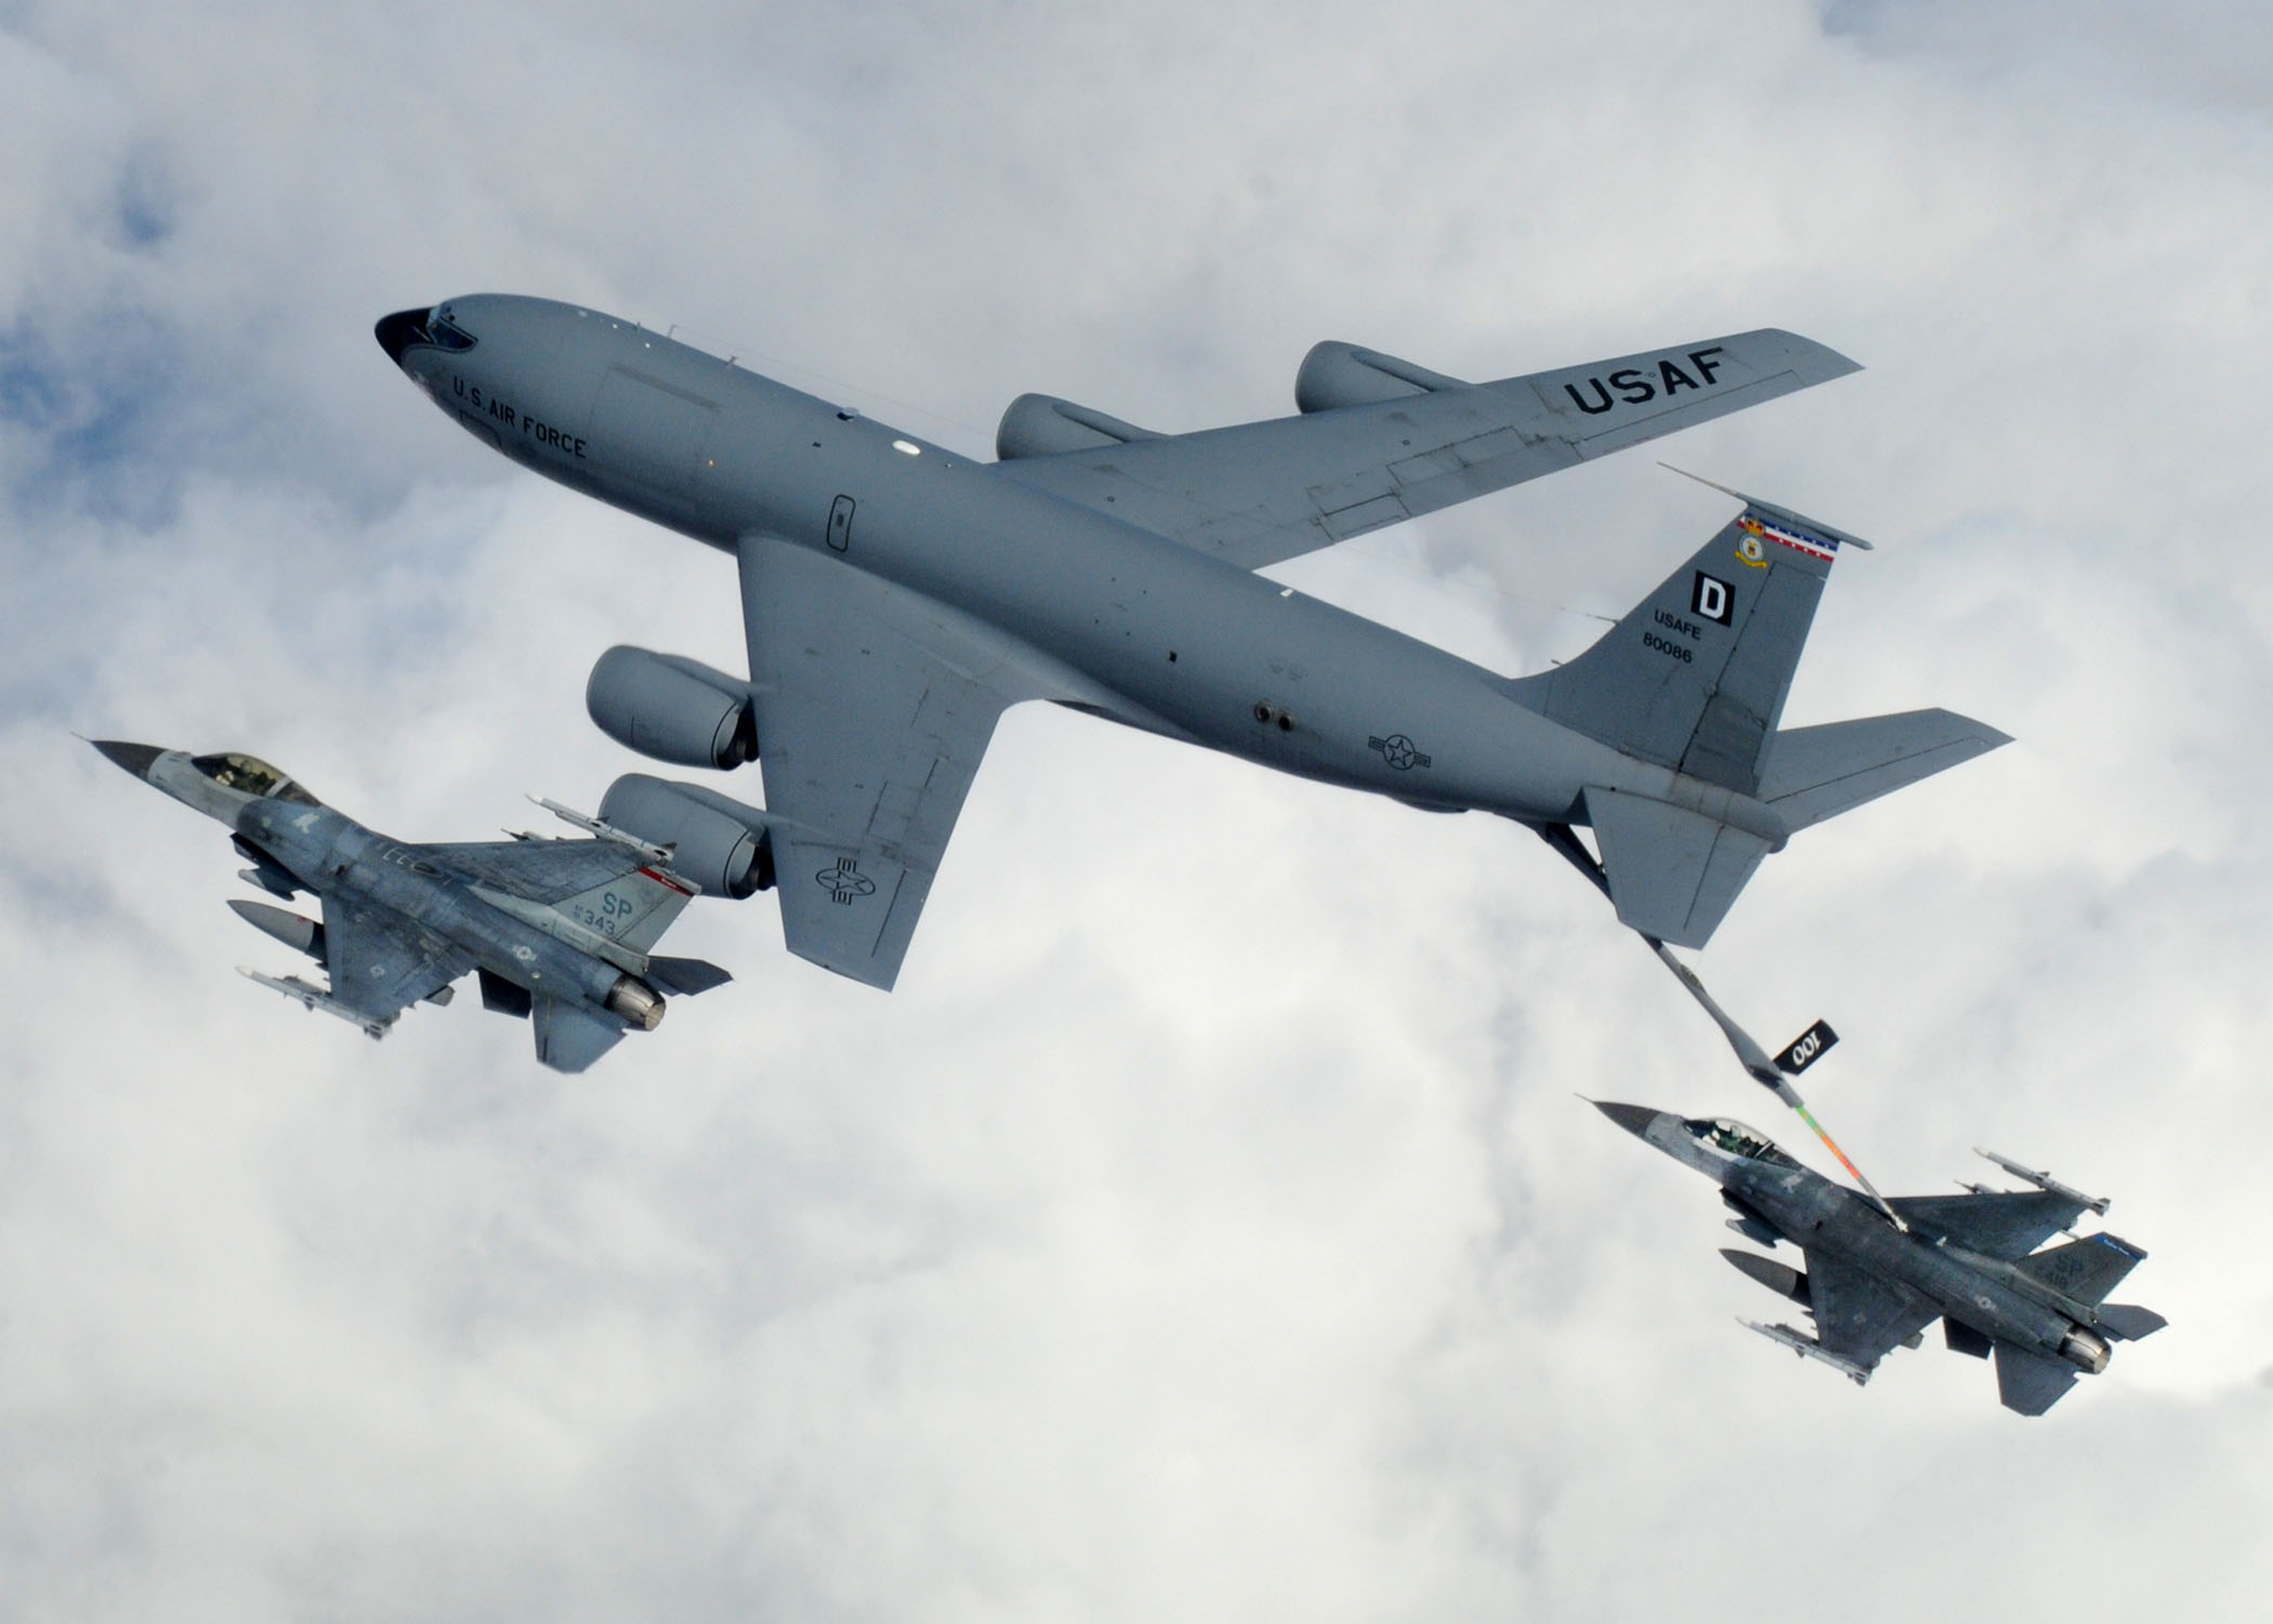 U.S Air Force • KC-135 Stratotankers • Refuel F-15 & F-16 Fighters • Over North Sea • 10 Sep 2020